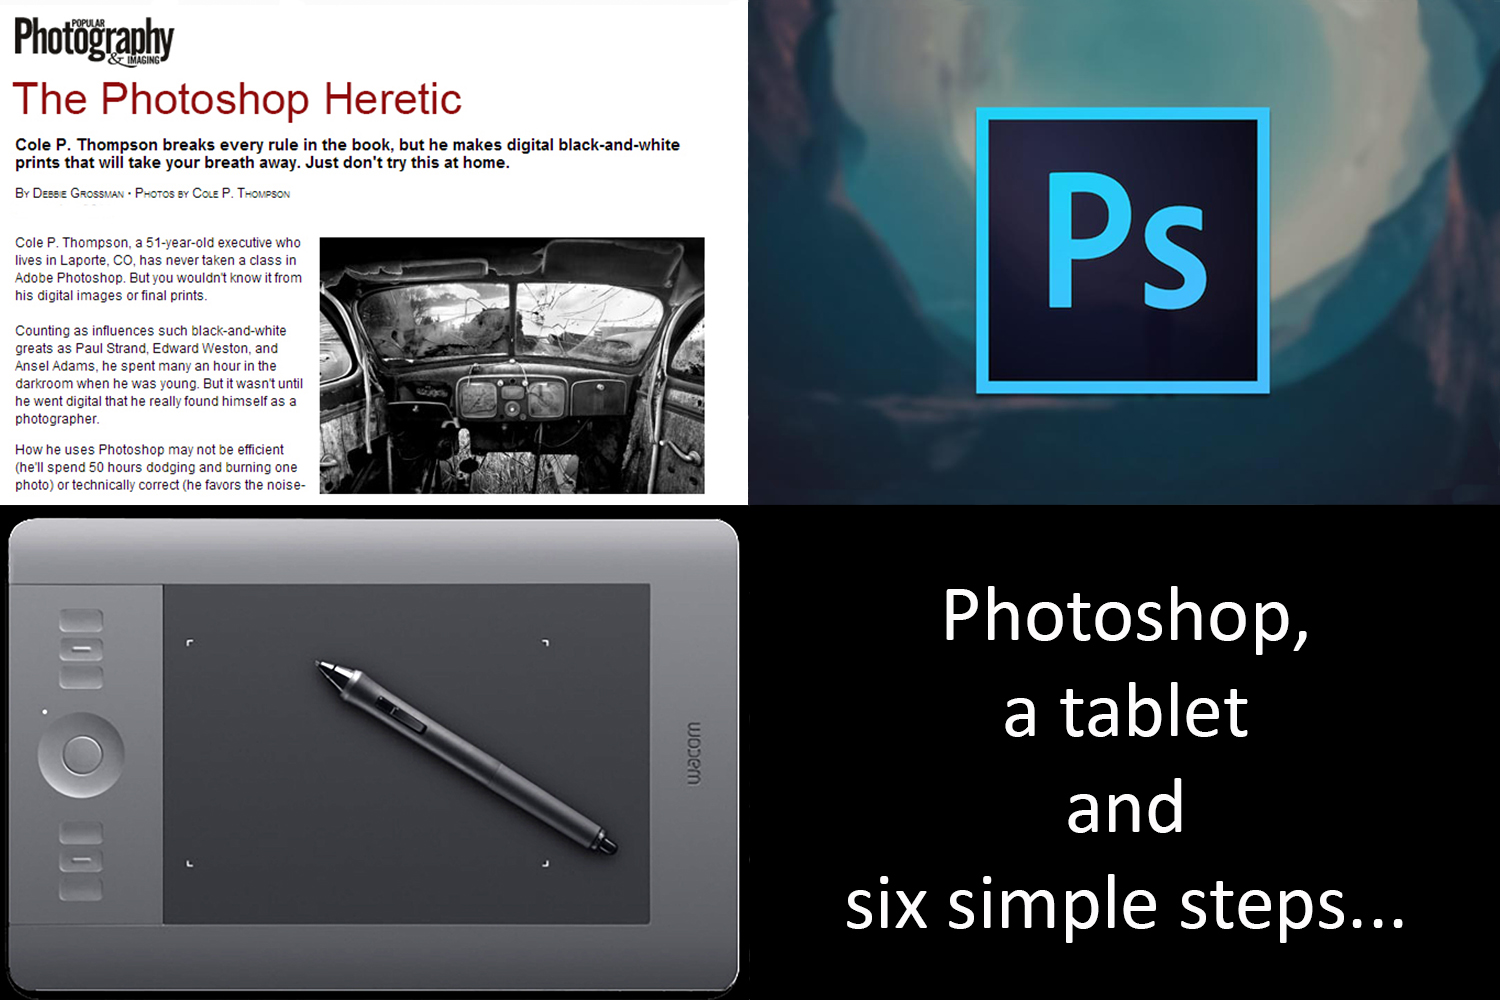 Workshop: “The Photoshop Heretic: How to Process Your B & W Images in 6 Simple Steps” with Cole Thompson